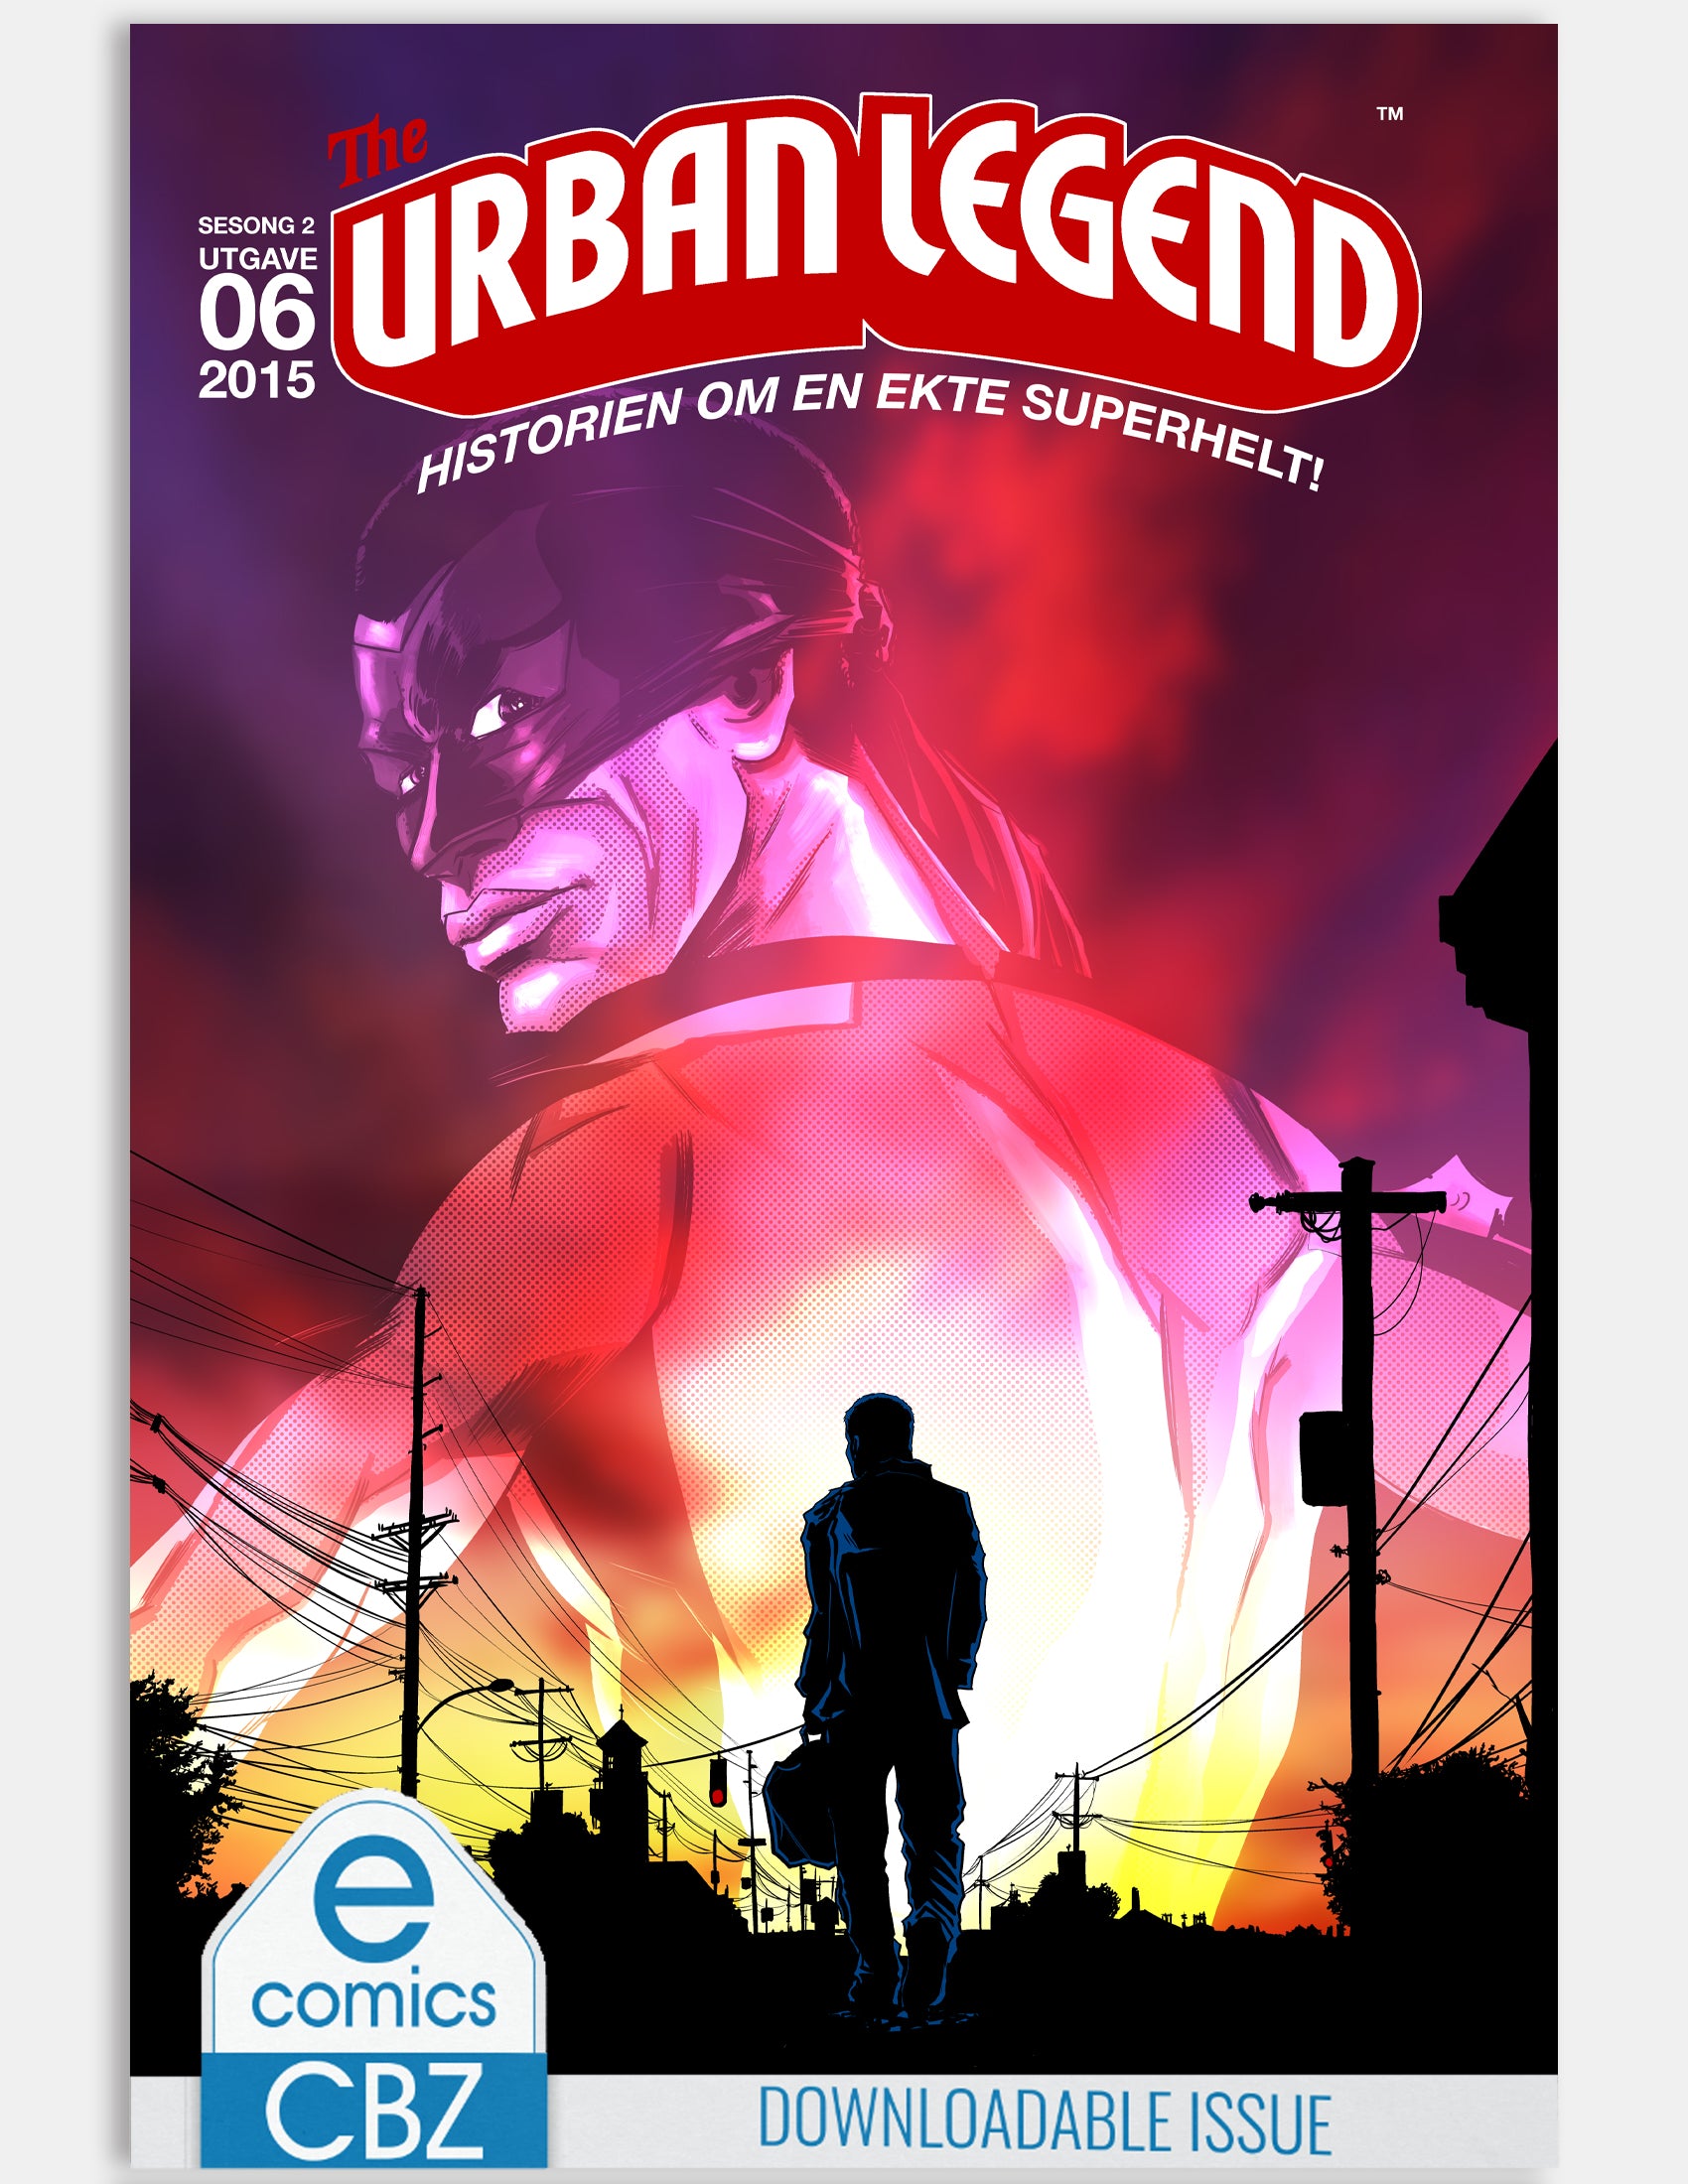 The Urban Legend - Small victories (Issue 6 - Season 2) - Digital Issue